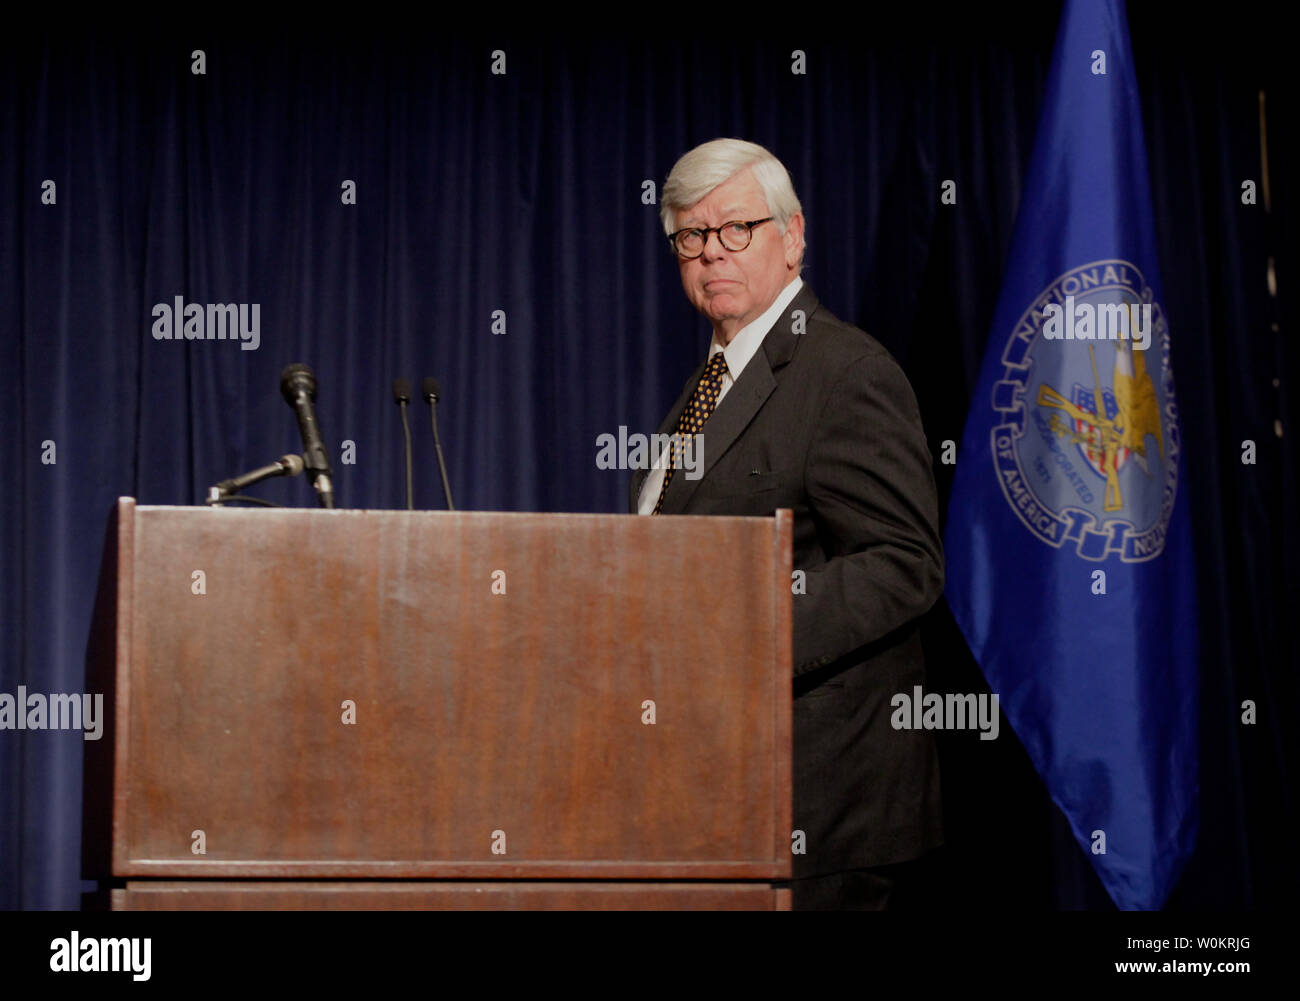 National Rifle Association (NRA) President David Keene arrives for  a press conference in Washington, DC, December 21, 2012.   Today marks one week since the Sandy Hook elementary  school masacre in Newtown, Connecticut where 20 children and 6 adults were killed in one of the deadliest school shootings in U.S. history.  UPI/Molly Riley Stock Photo